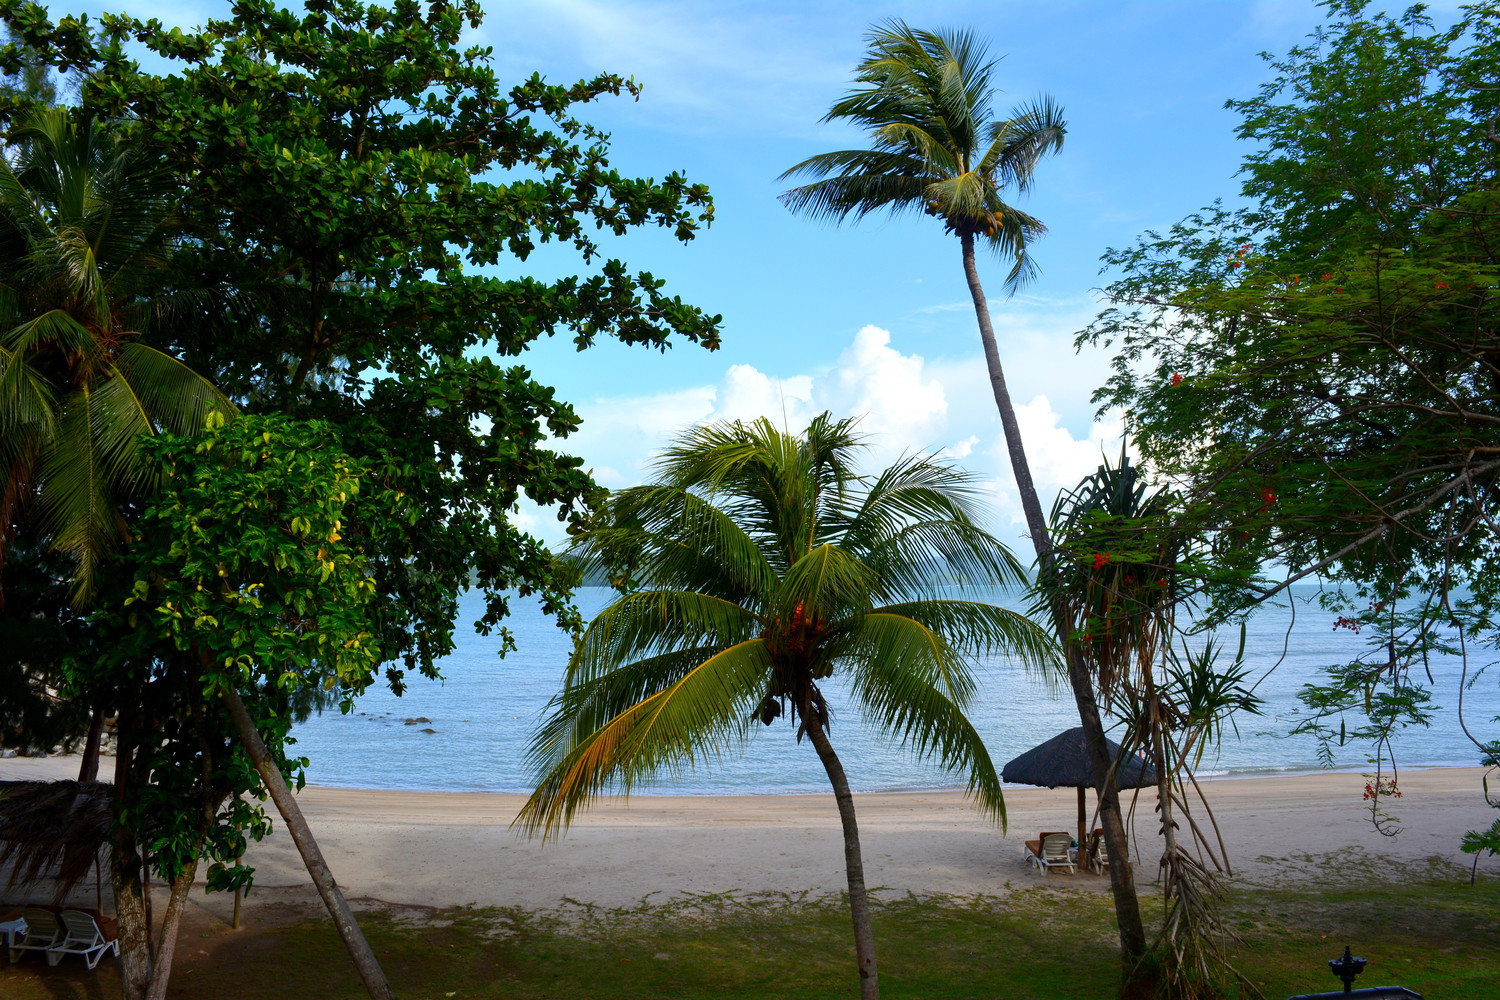 Sea beach with deck chairs under a thatched umbrella, coconut palm trees, and other trees